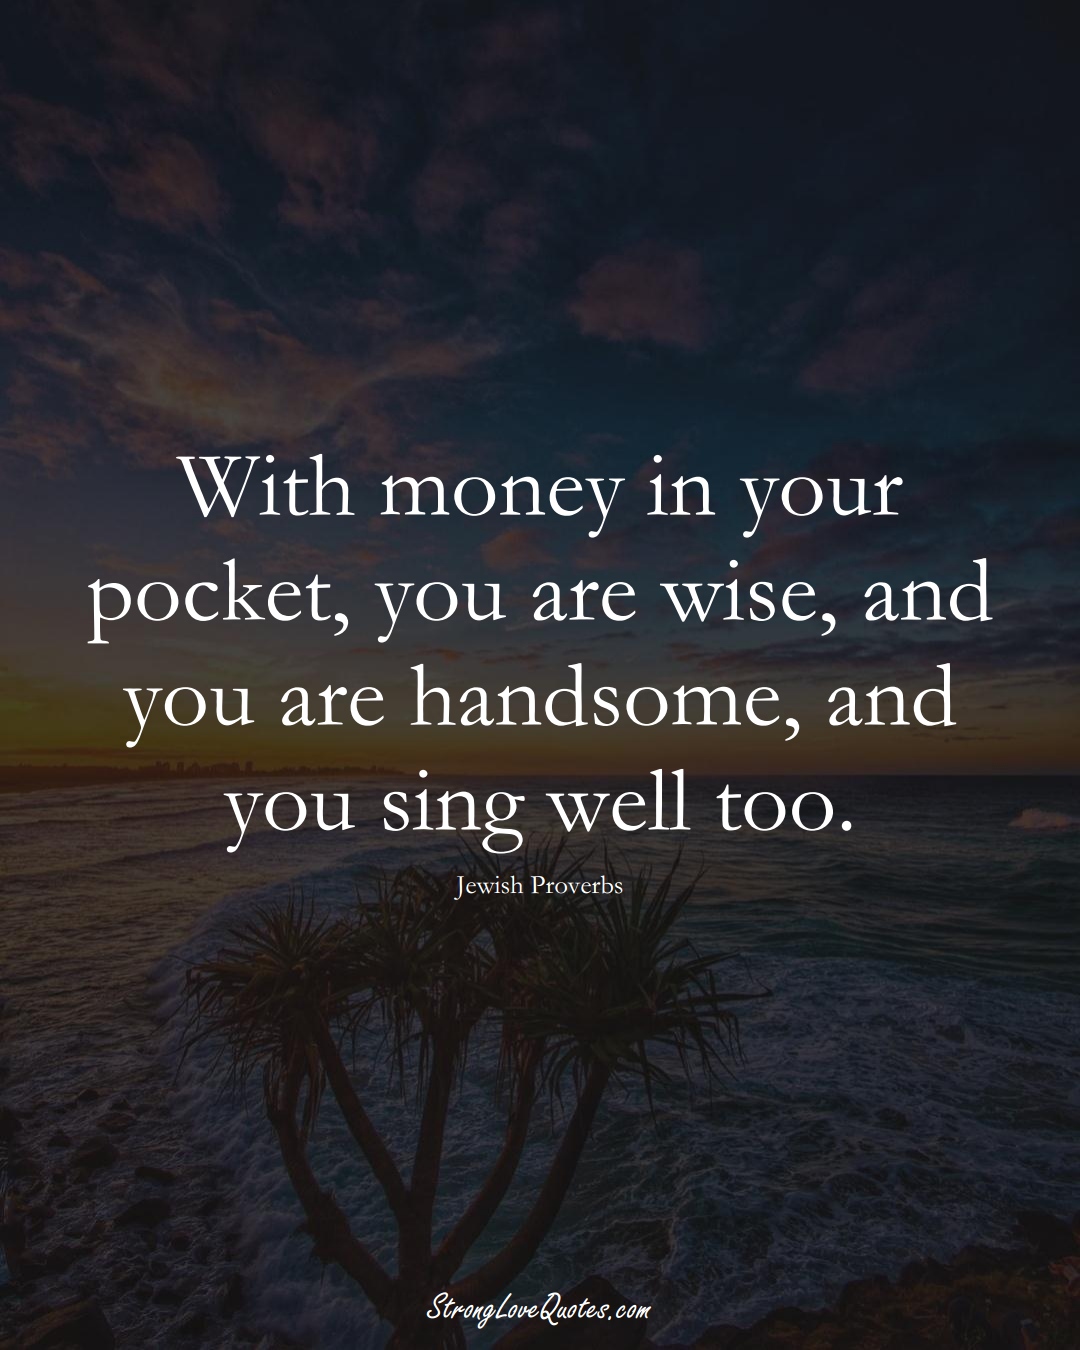 With money in your pocket, you are wise, and you are handsome, and you sing well too. (Jewish Sayings);  #aVarietyofCulturesSayings